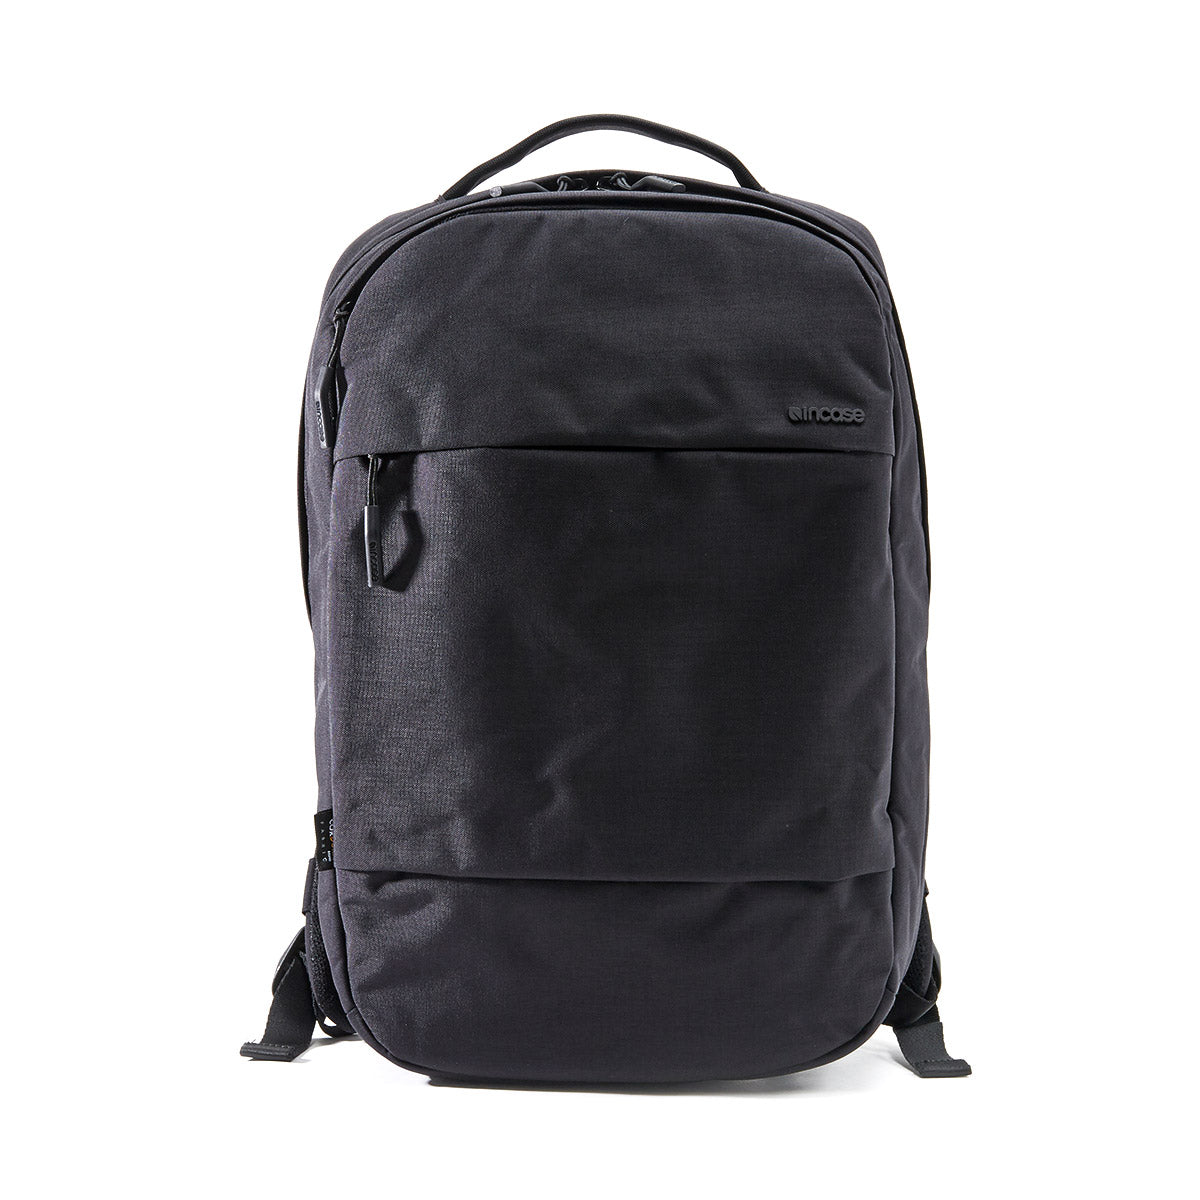 Incase City Backpack City Compact Backpack With Cordura Nylon 